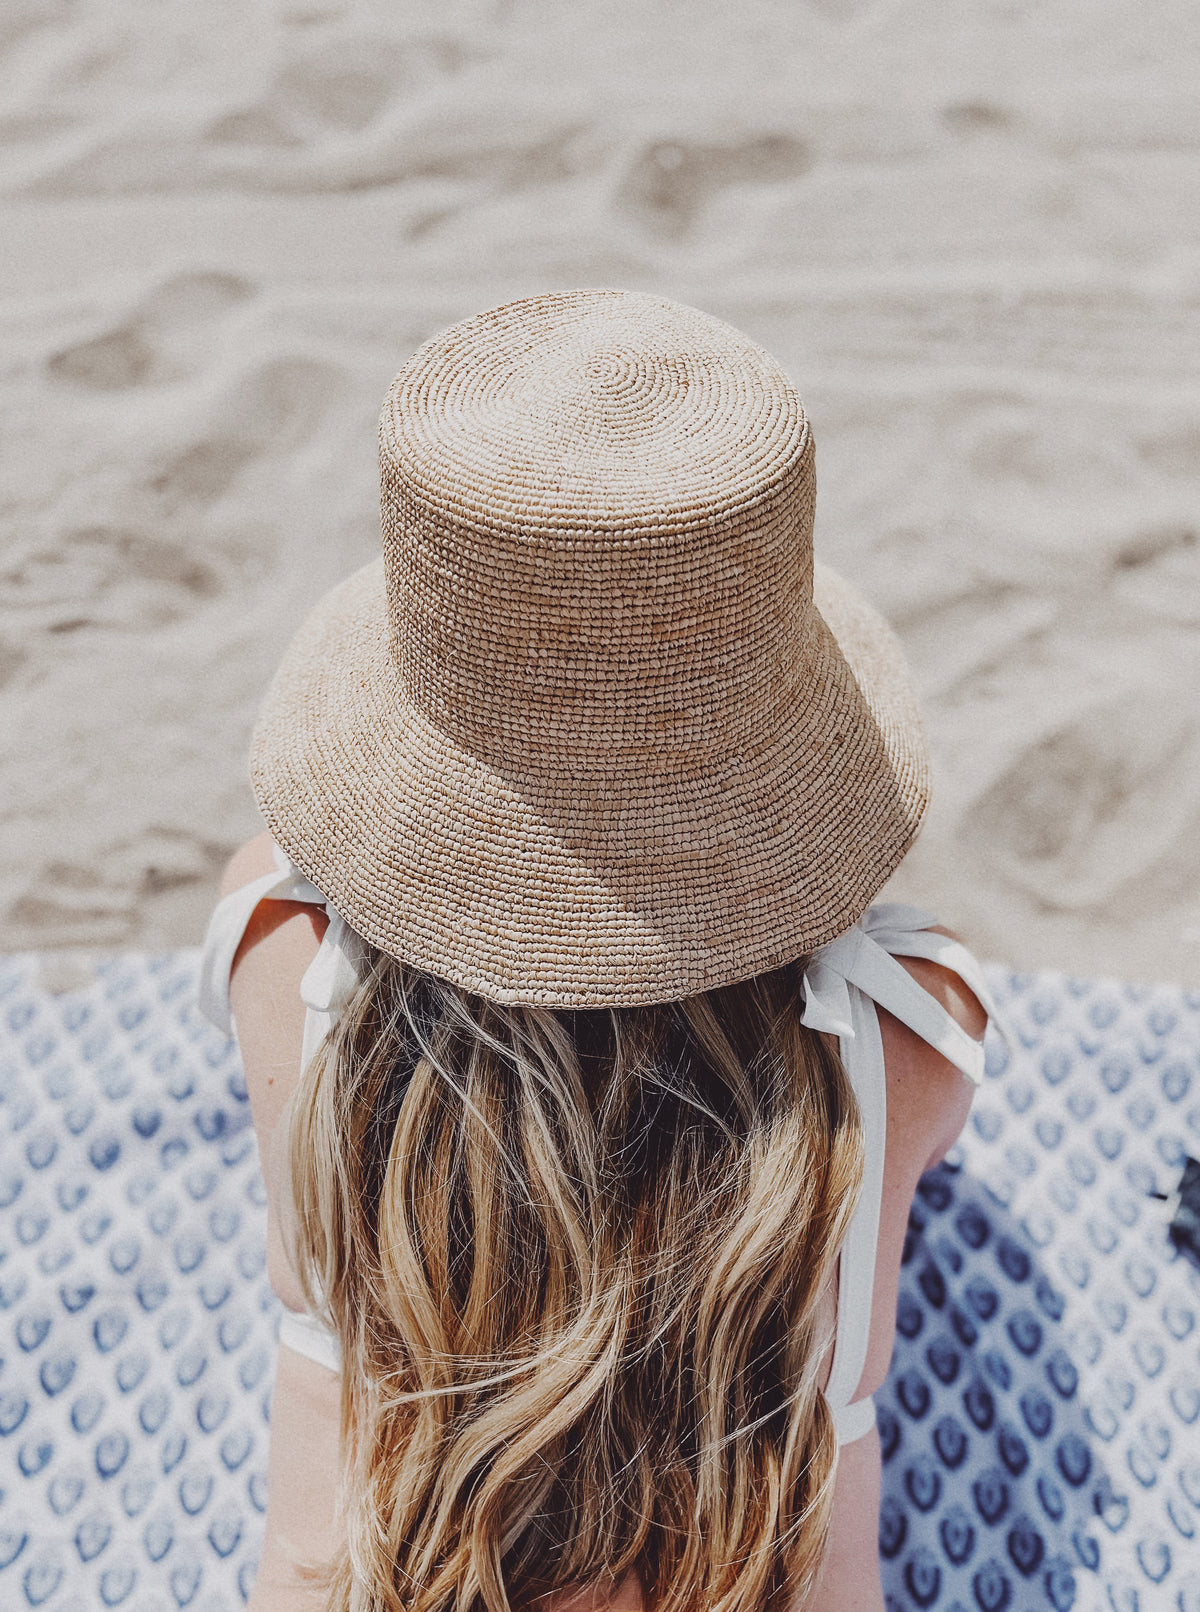 Hat Attack, one stop shopping for sunhats and packable styles – Hat Attack  New York